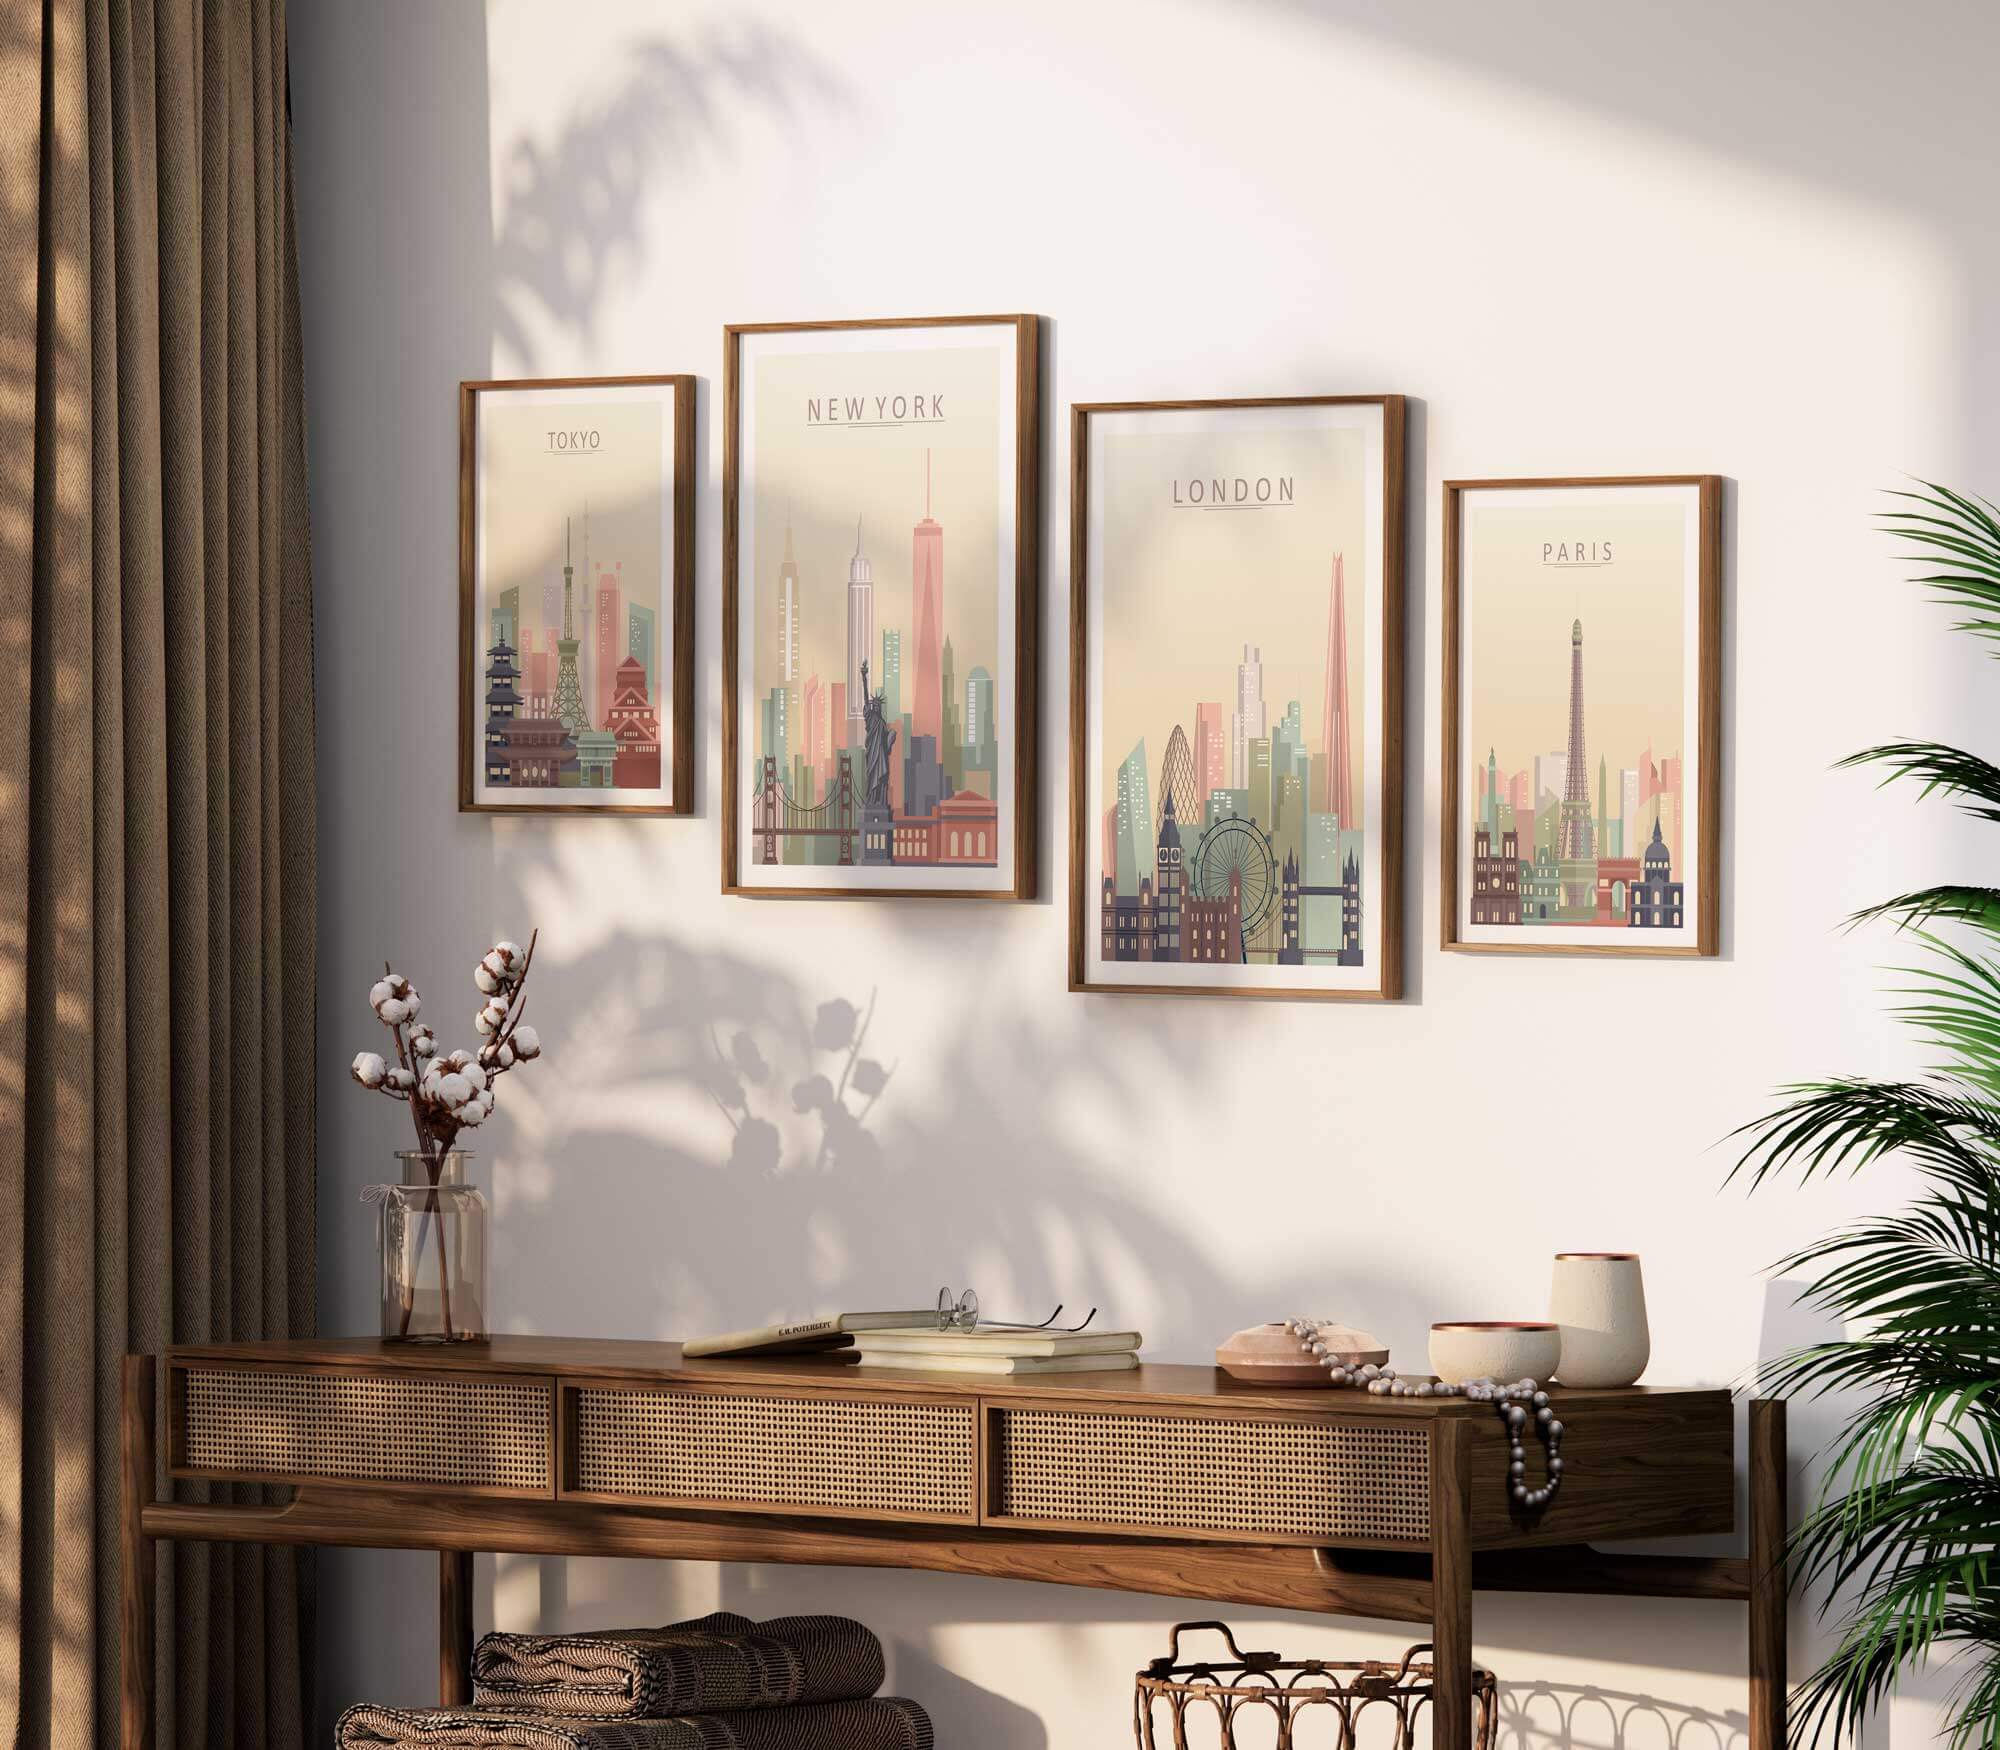 City Skyline Prints - New York, London, Tokyo and Paris in wood frames above a desk